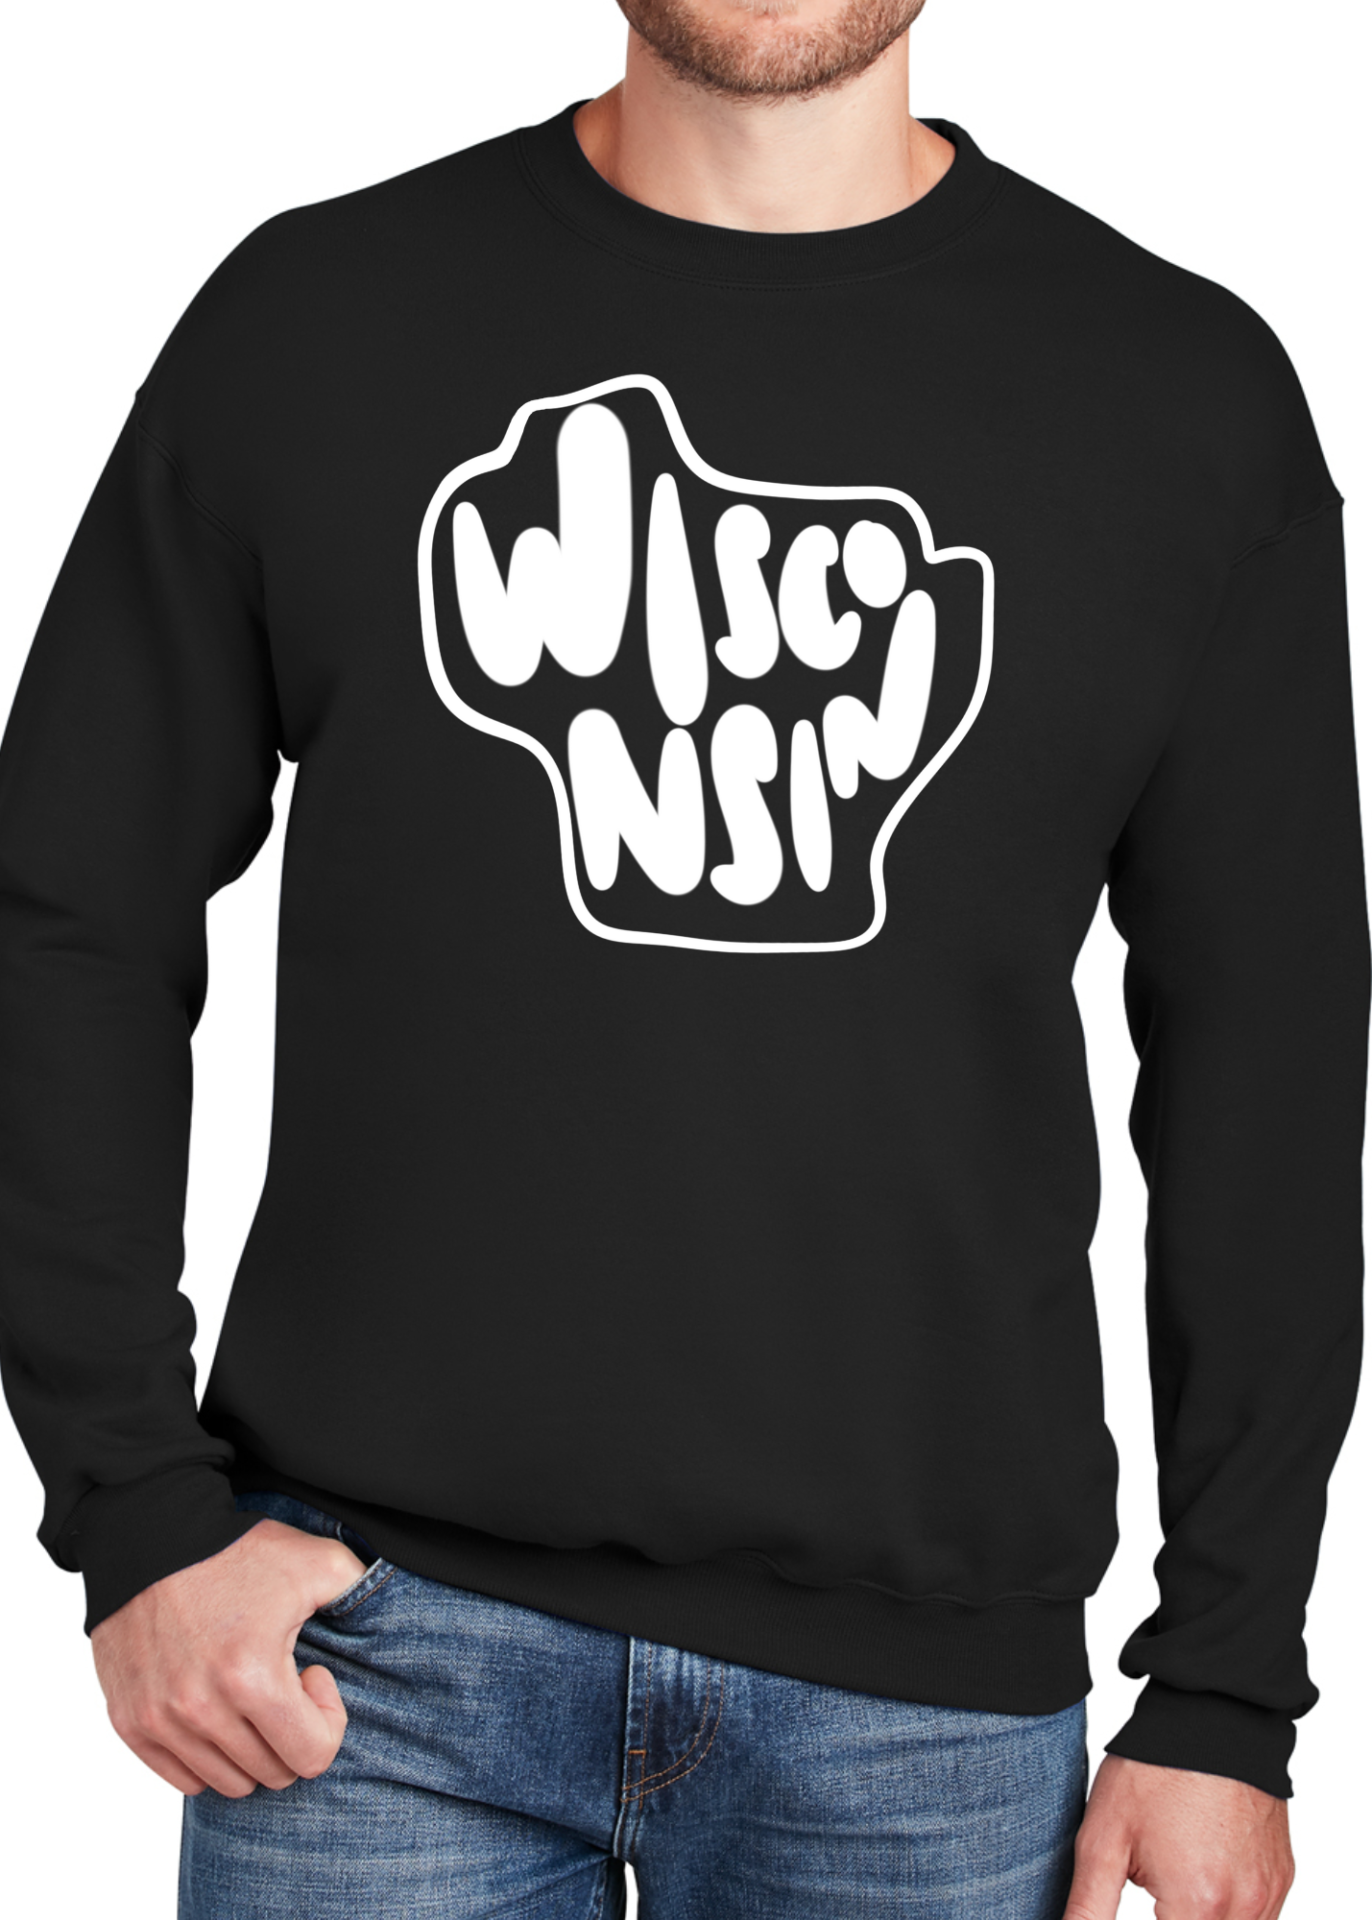 Wisconsin text in the shape of Wisconsin in white ink on a black crewneck